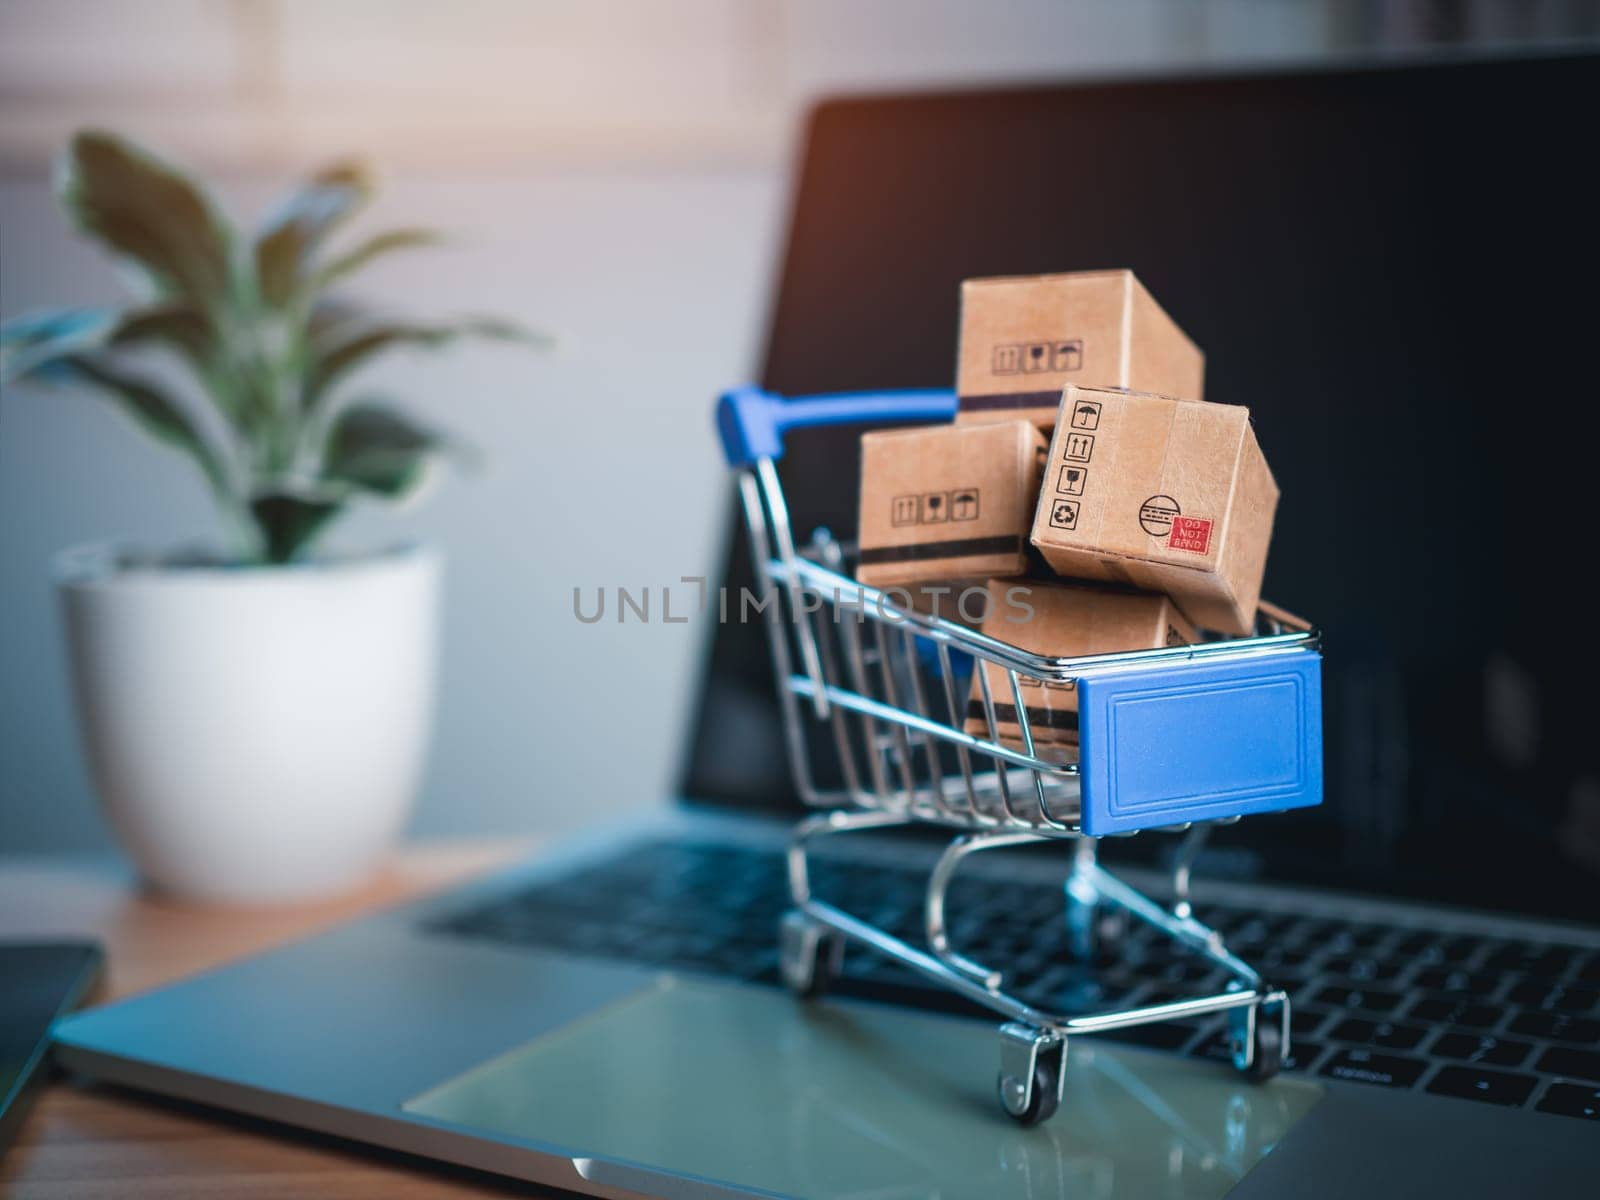 Shopping cart and product boxes placed on laptop computer represent online shopping concept, website, e-commerce, marketplace platform, technology, transportation, logistics and online payment concept.